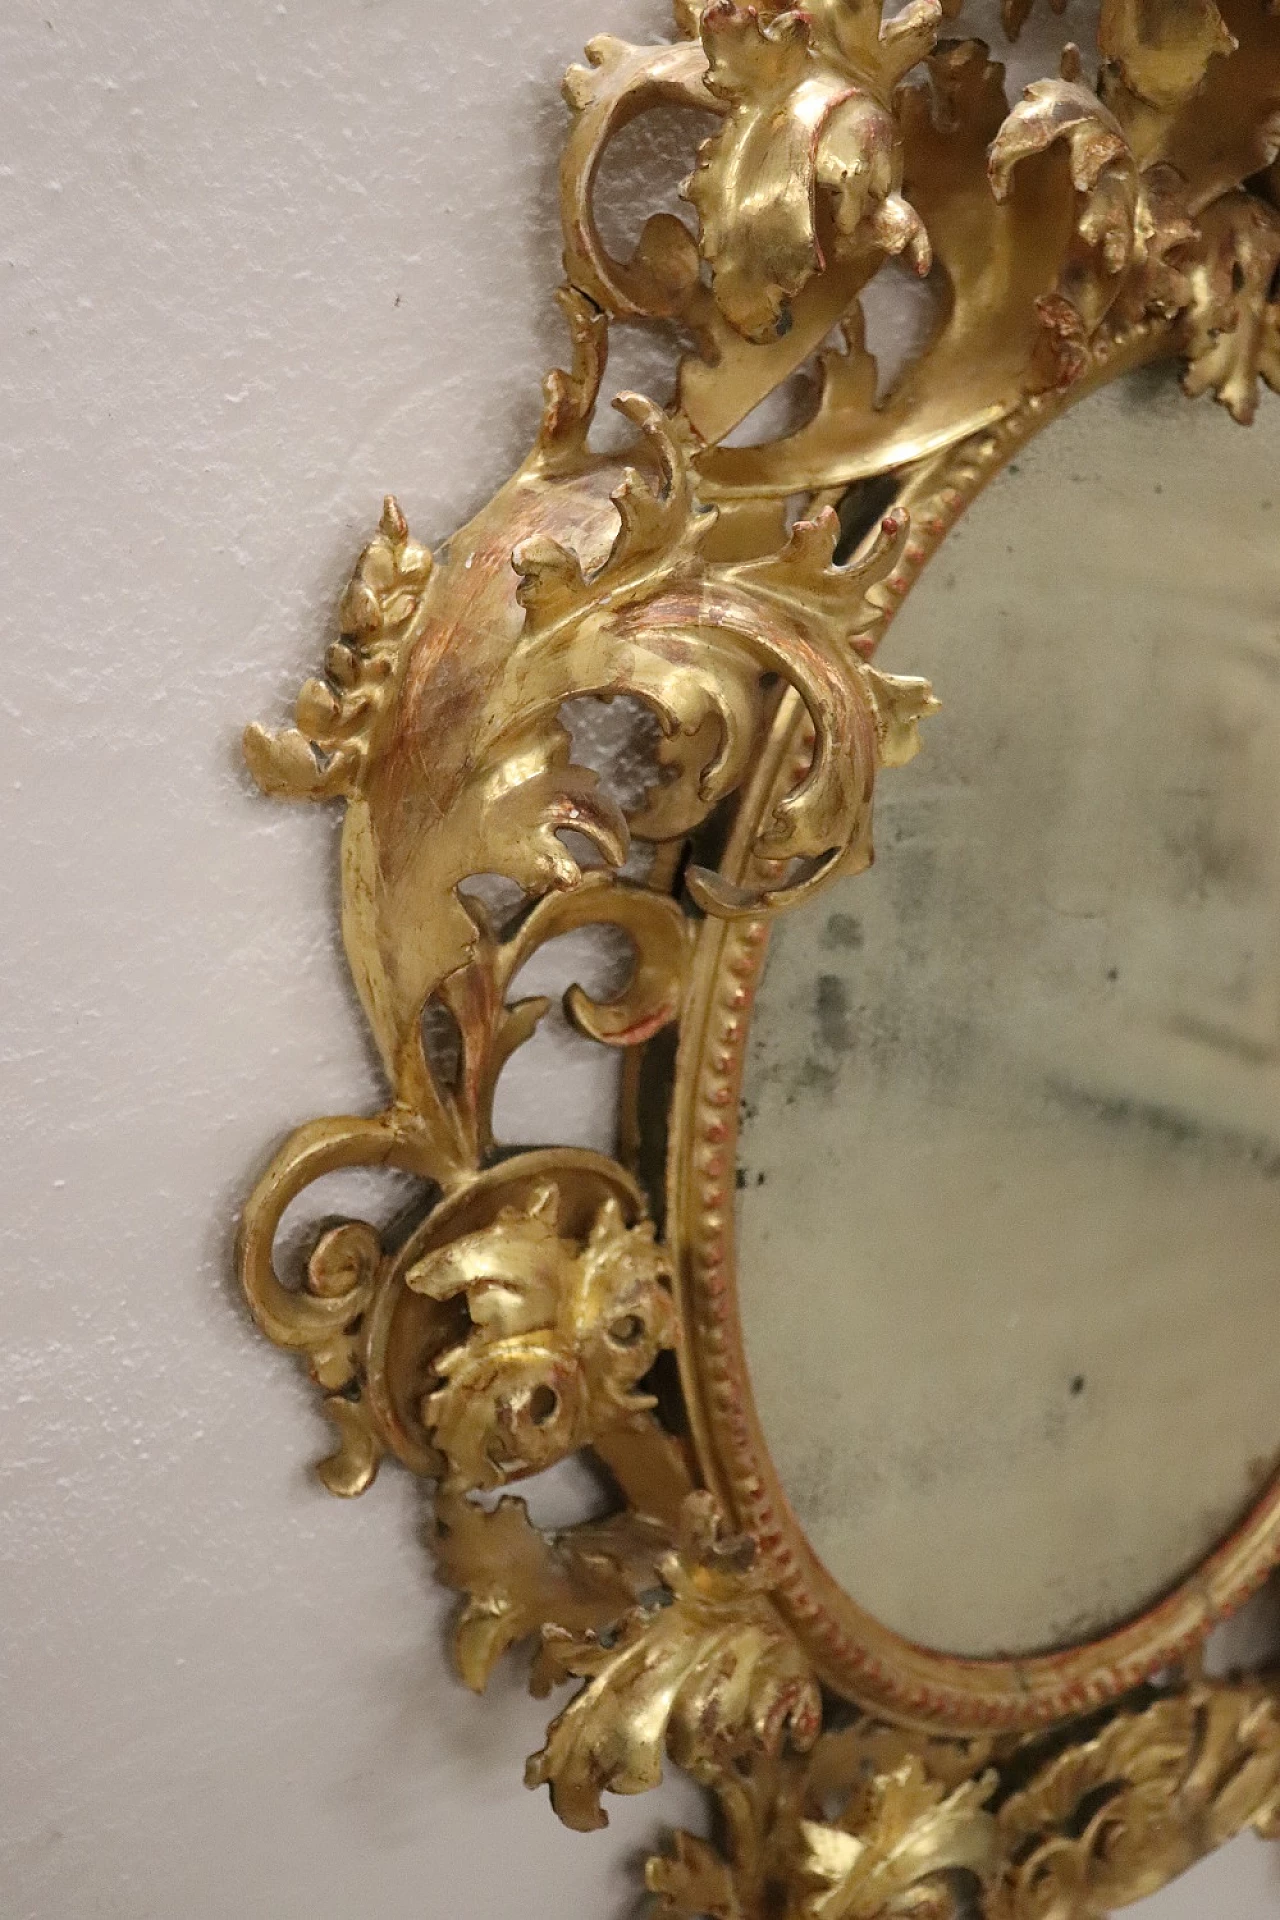 Cartoccio mirror in carved and gilded wood, 18th century 6